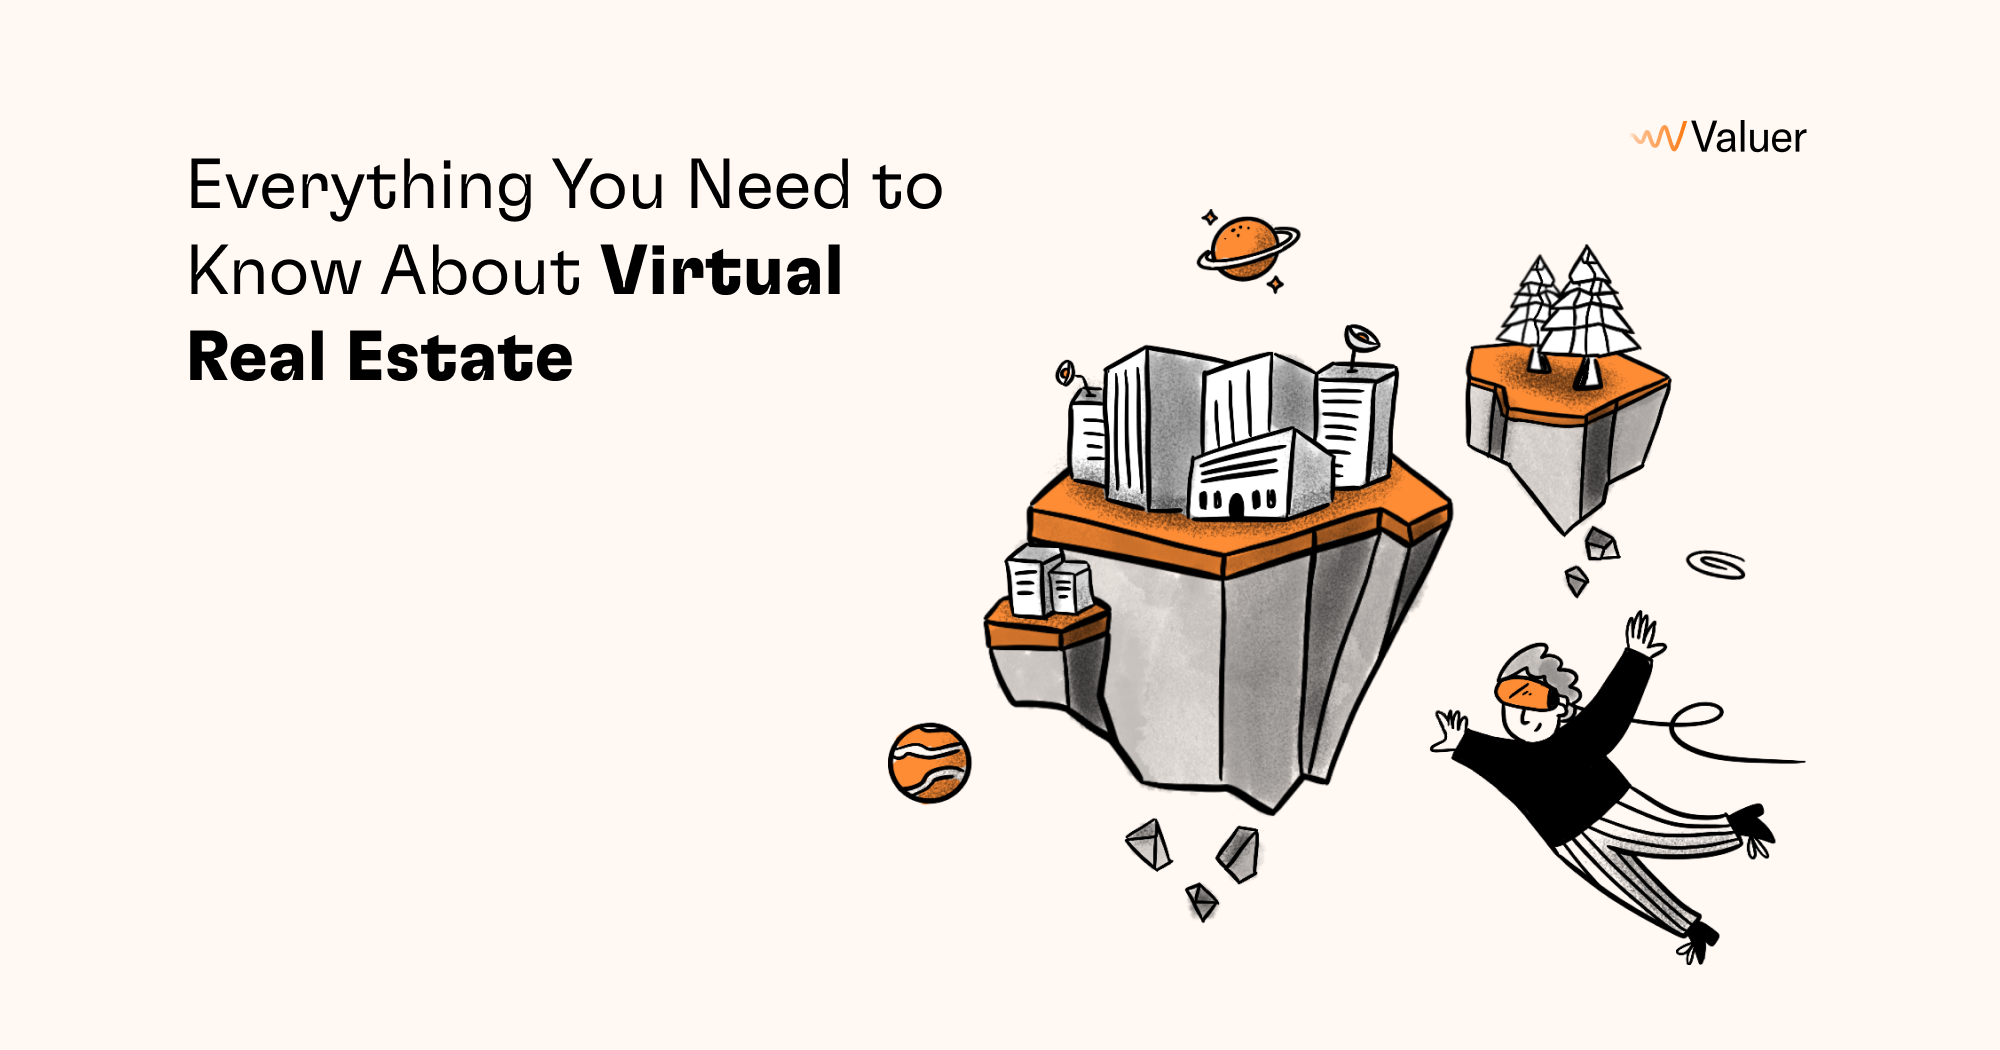 Everything You Need to Know About Virtual Real Estate